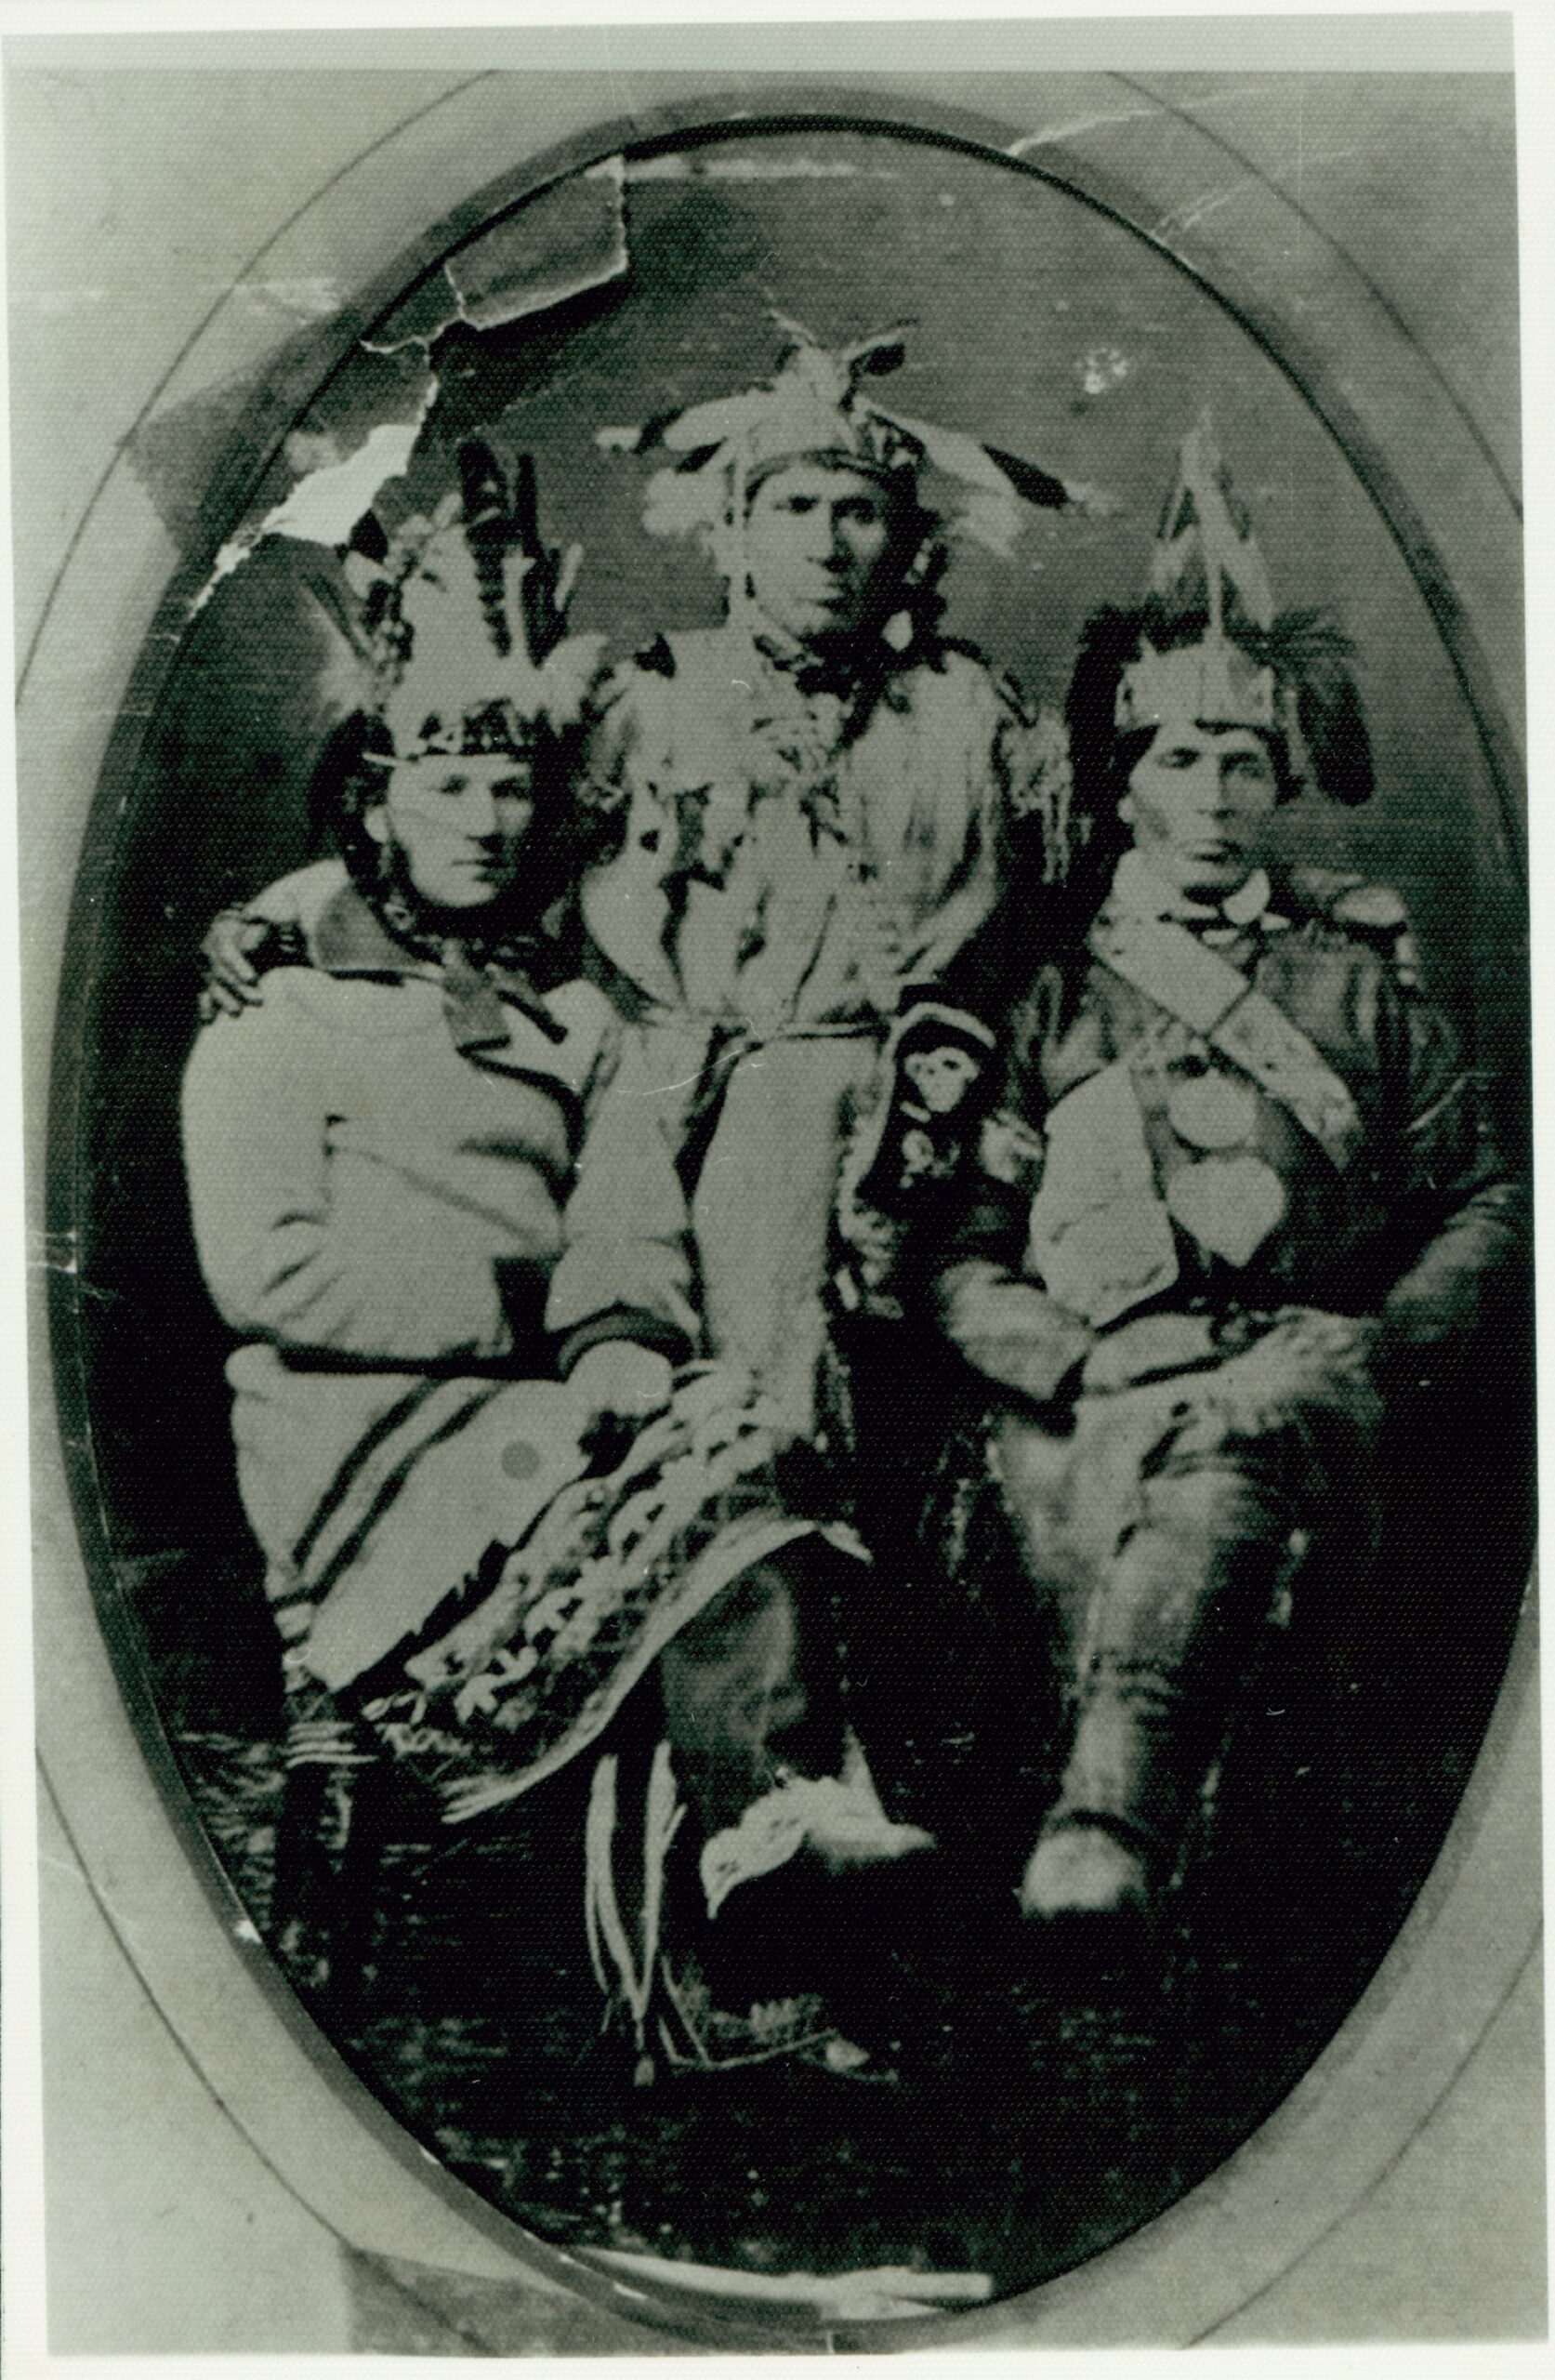 Chiefs Shingwaukonse, middle, and Nebenaigoching, right, in a photo thought to have been taken at the Robinson Huron Treaty signing in 1850.